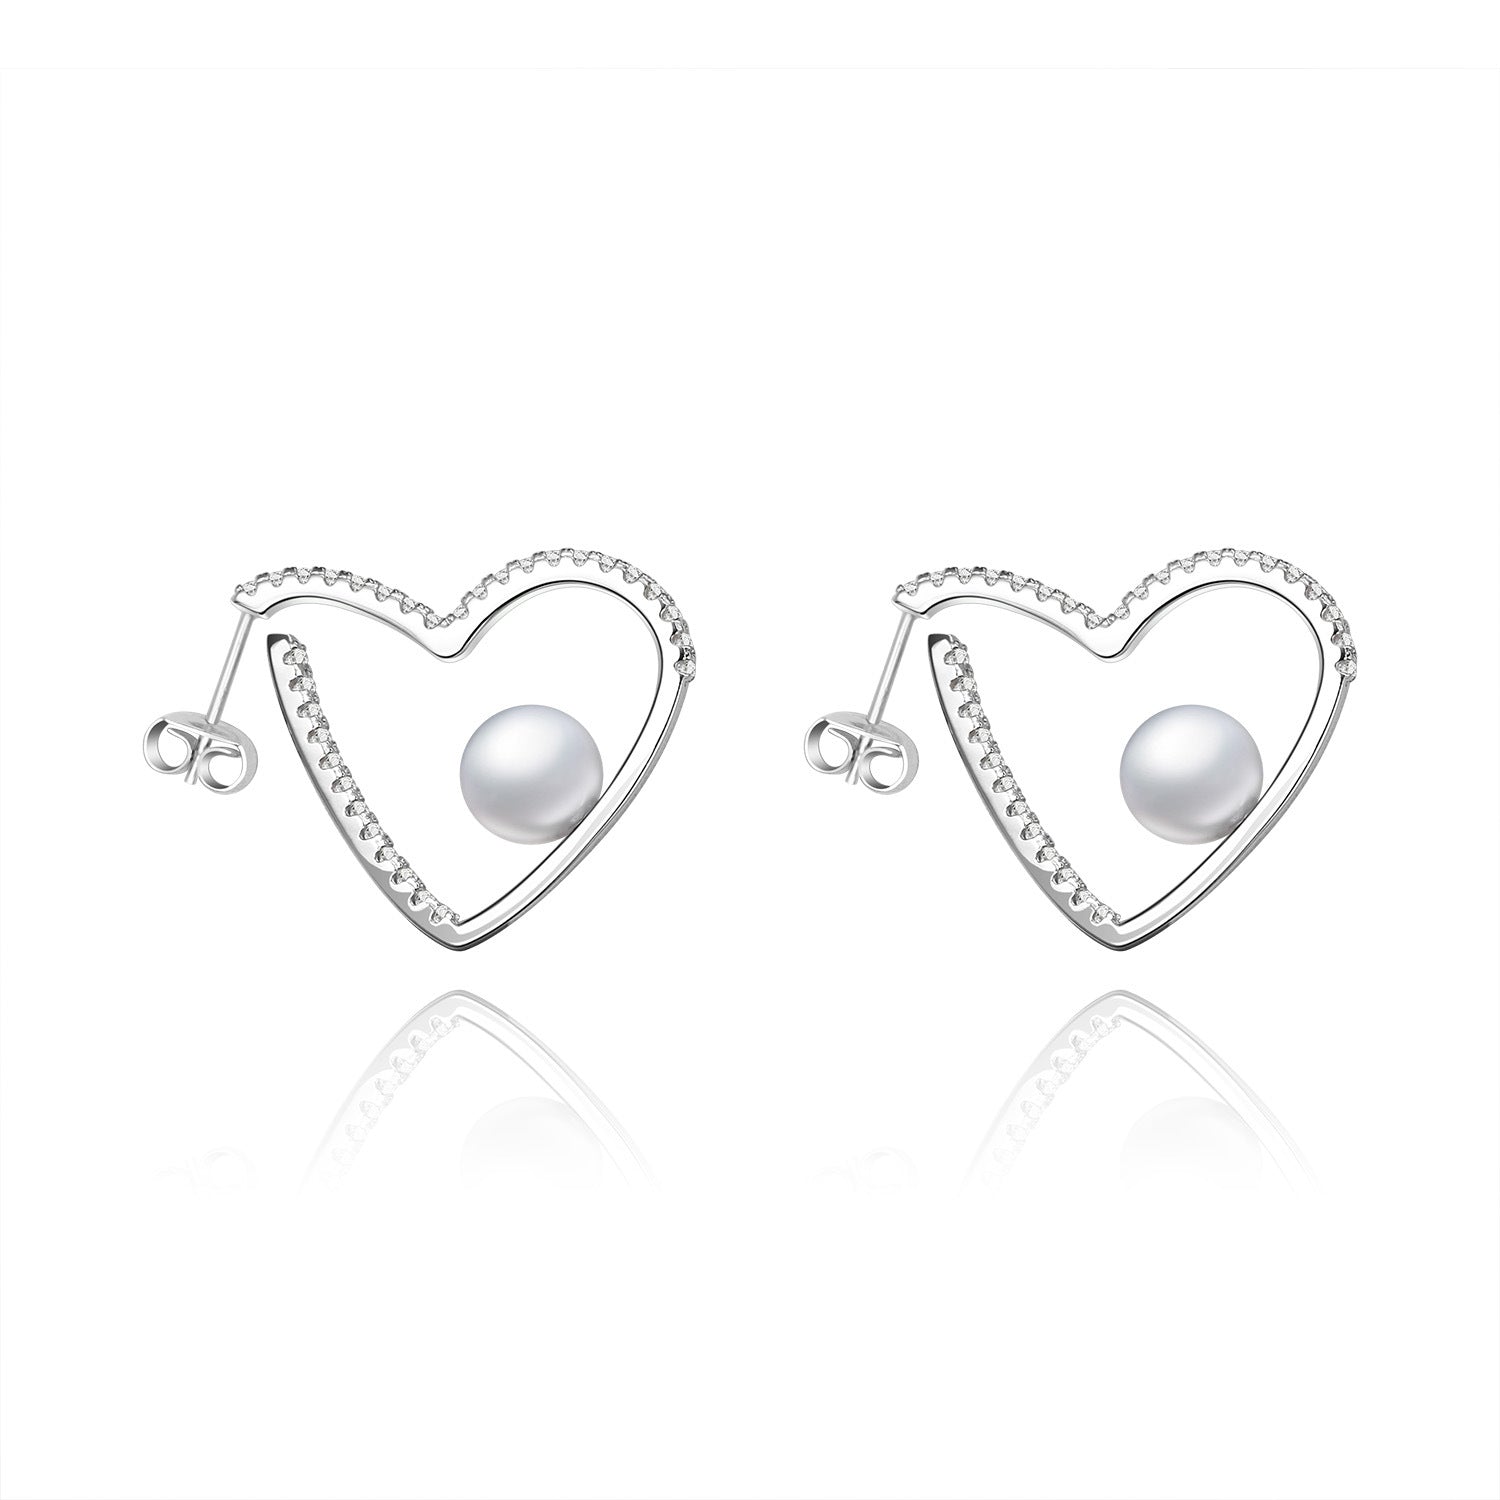 Love Shape with Natural Fresh Water Pearl Silver Studs Earrings for Women